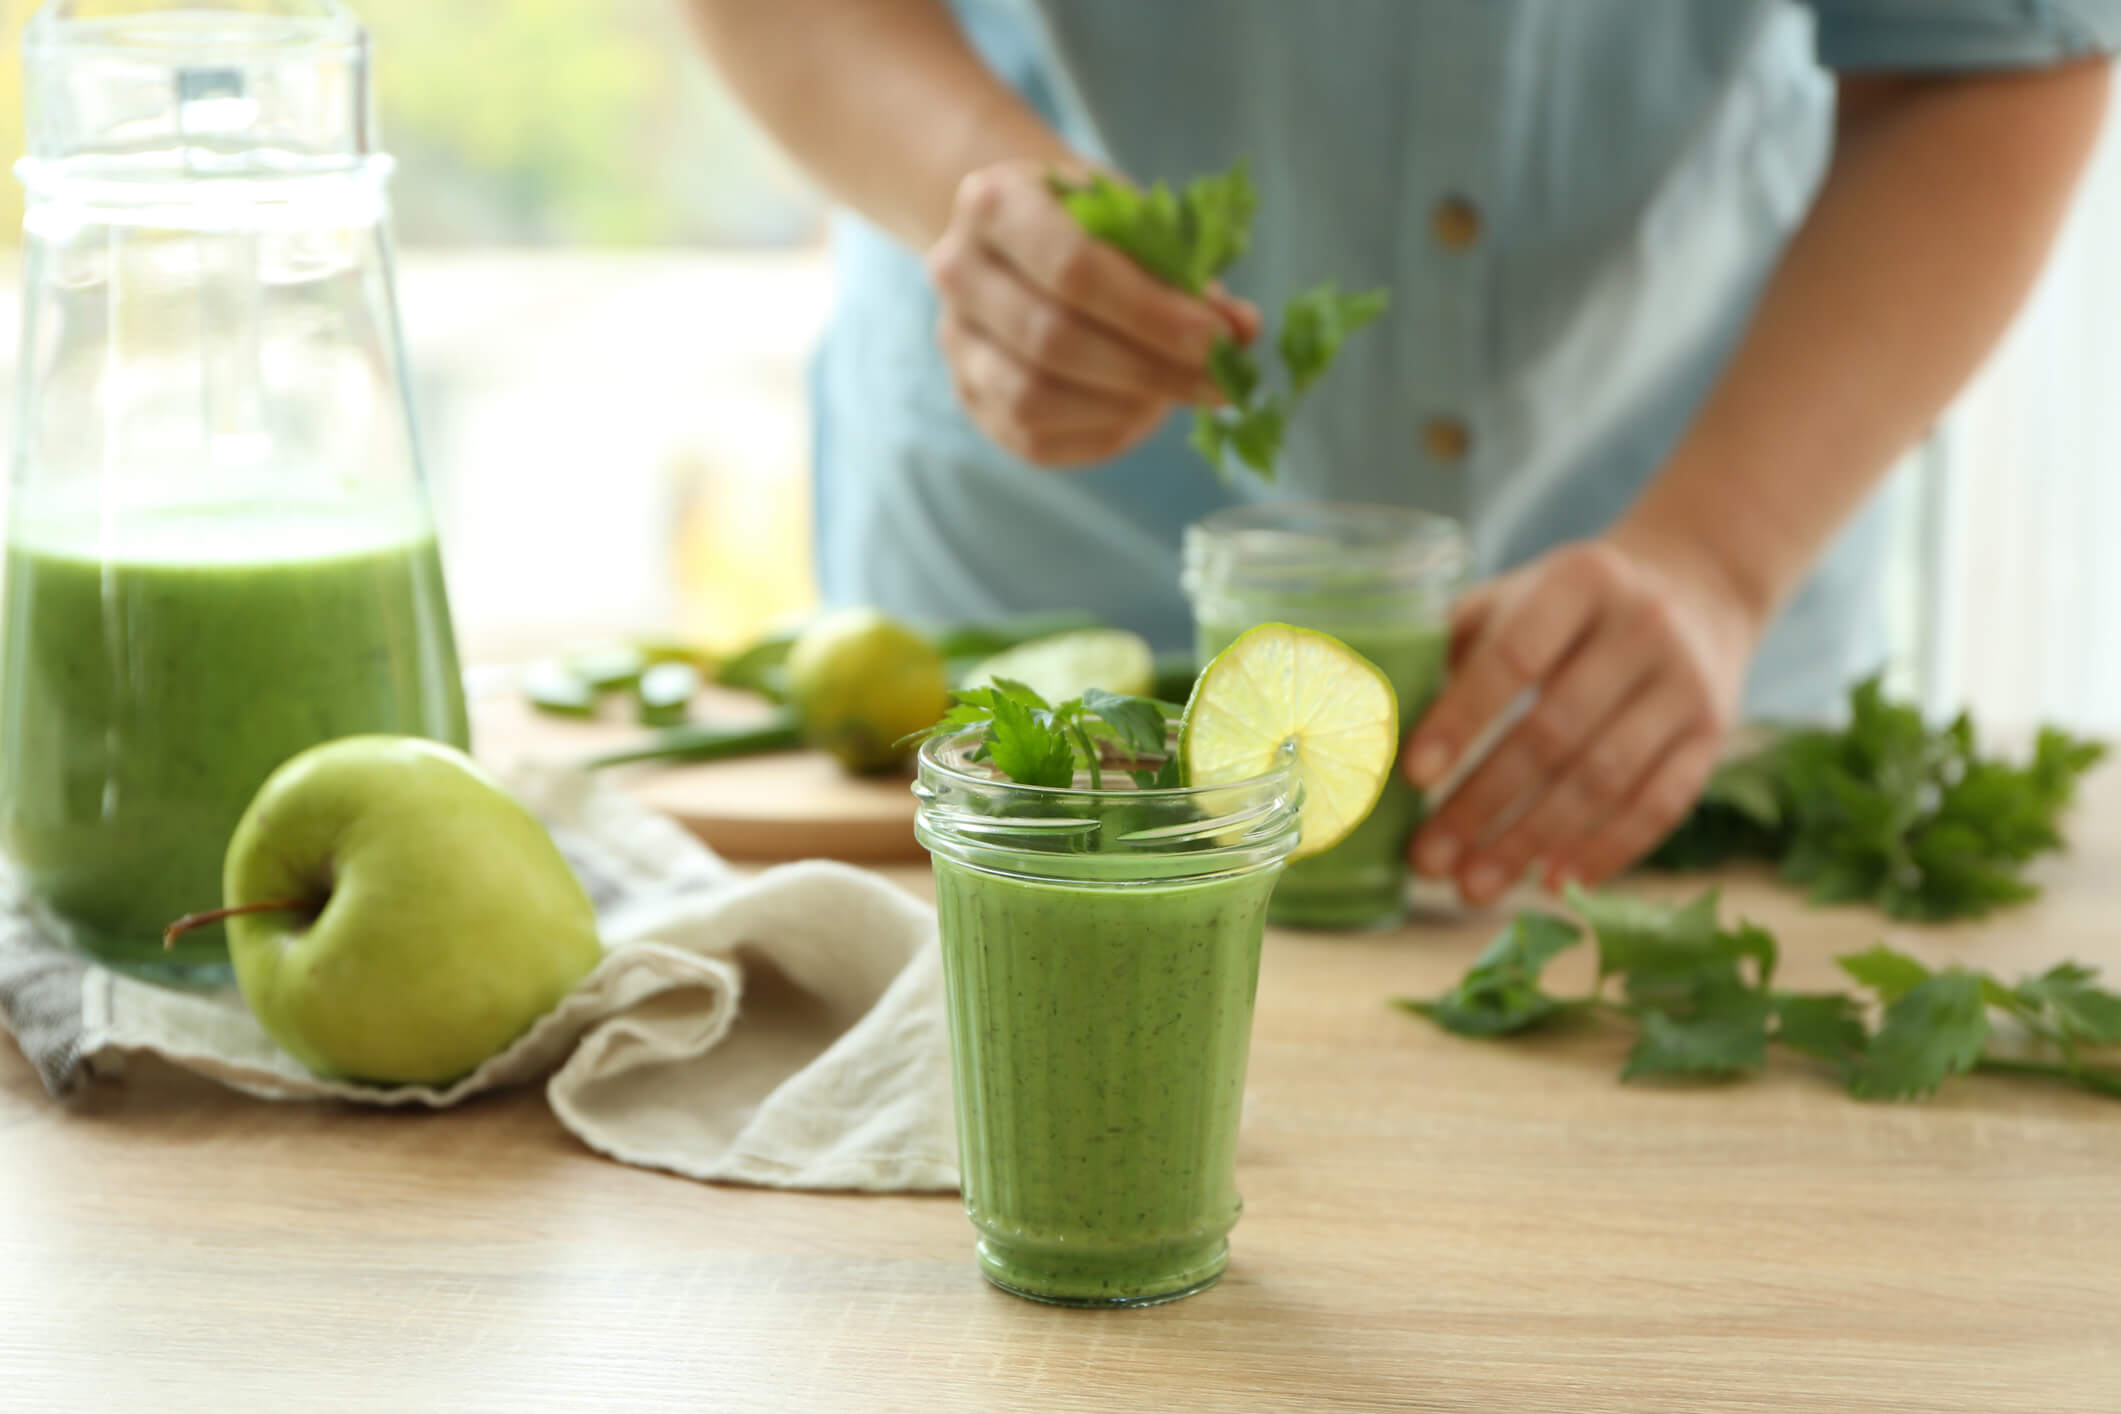 Making a healthy green smoothie with apples and kale.